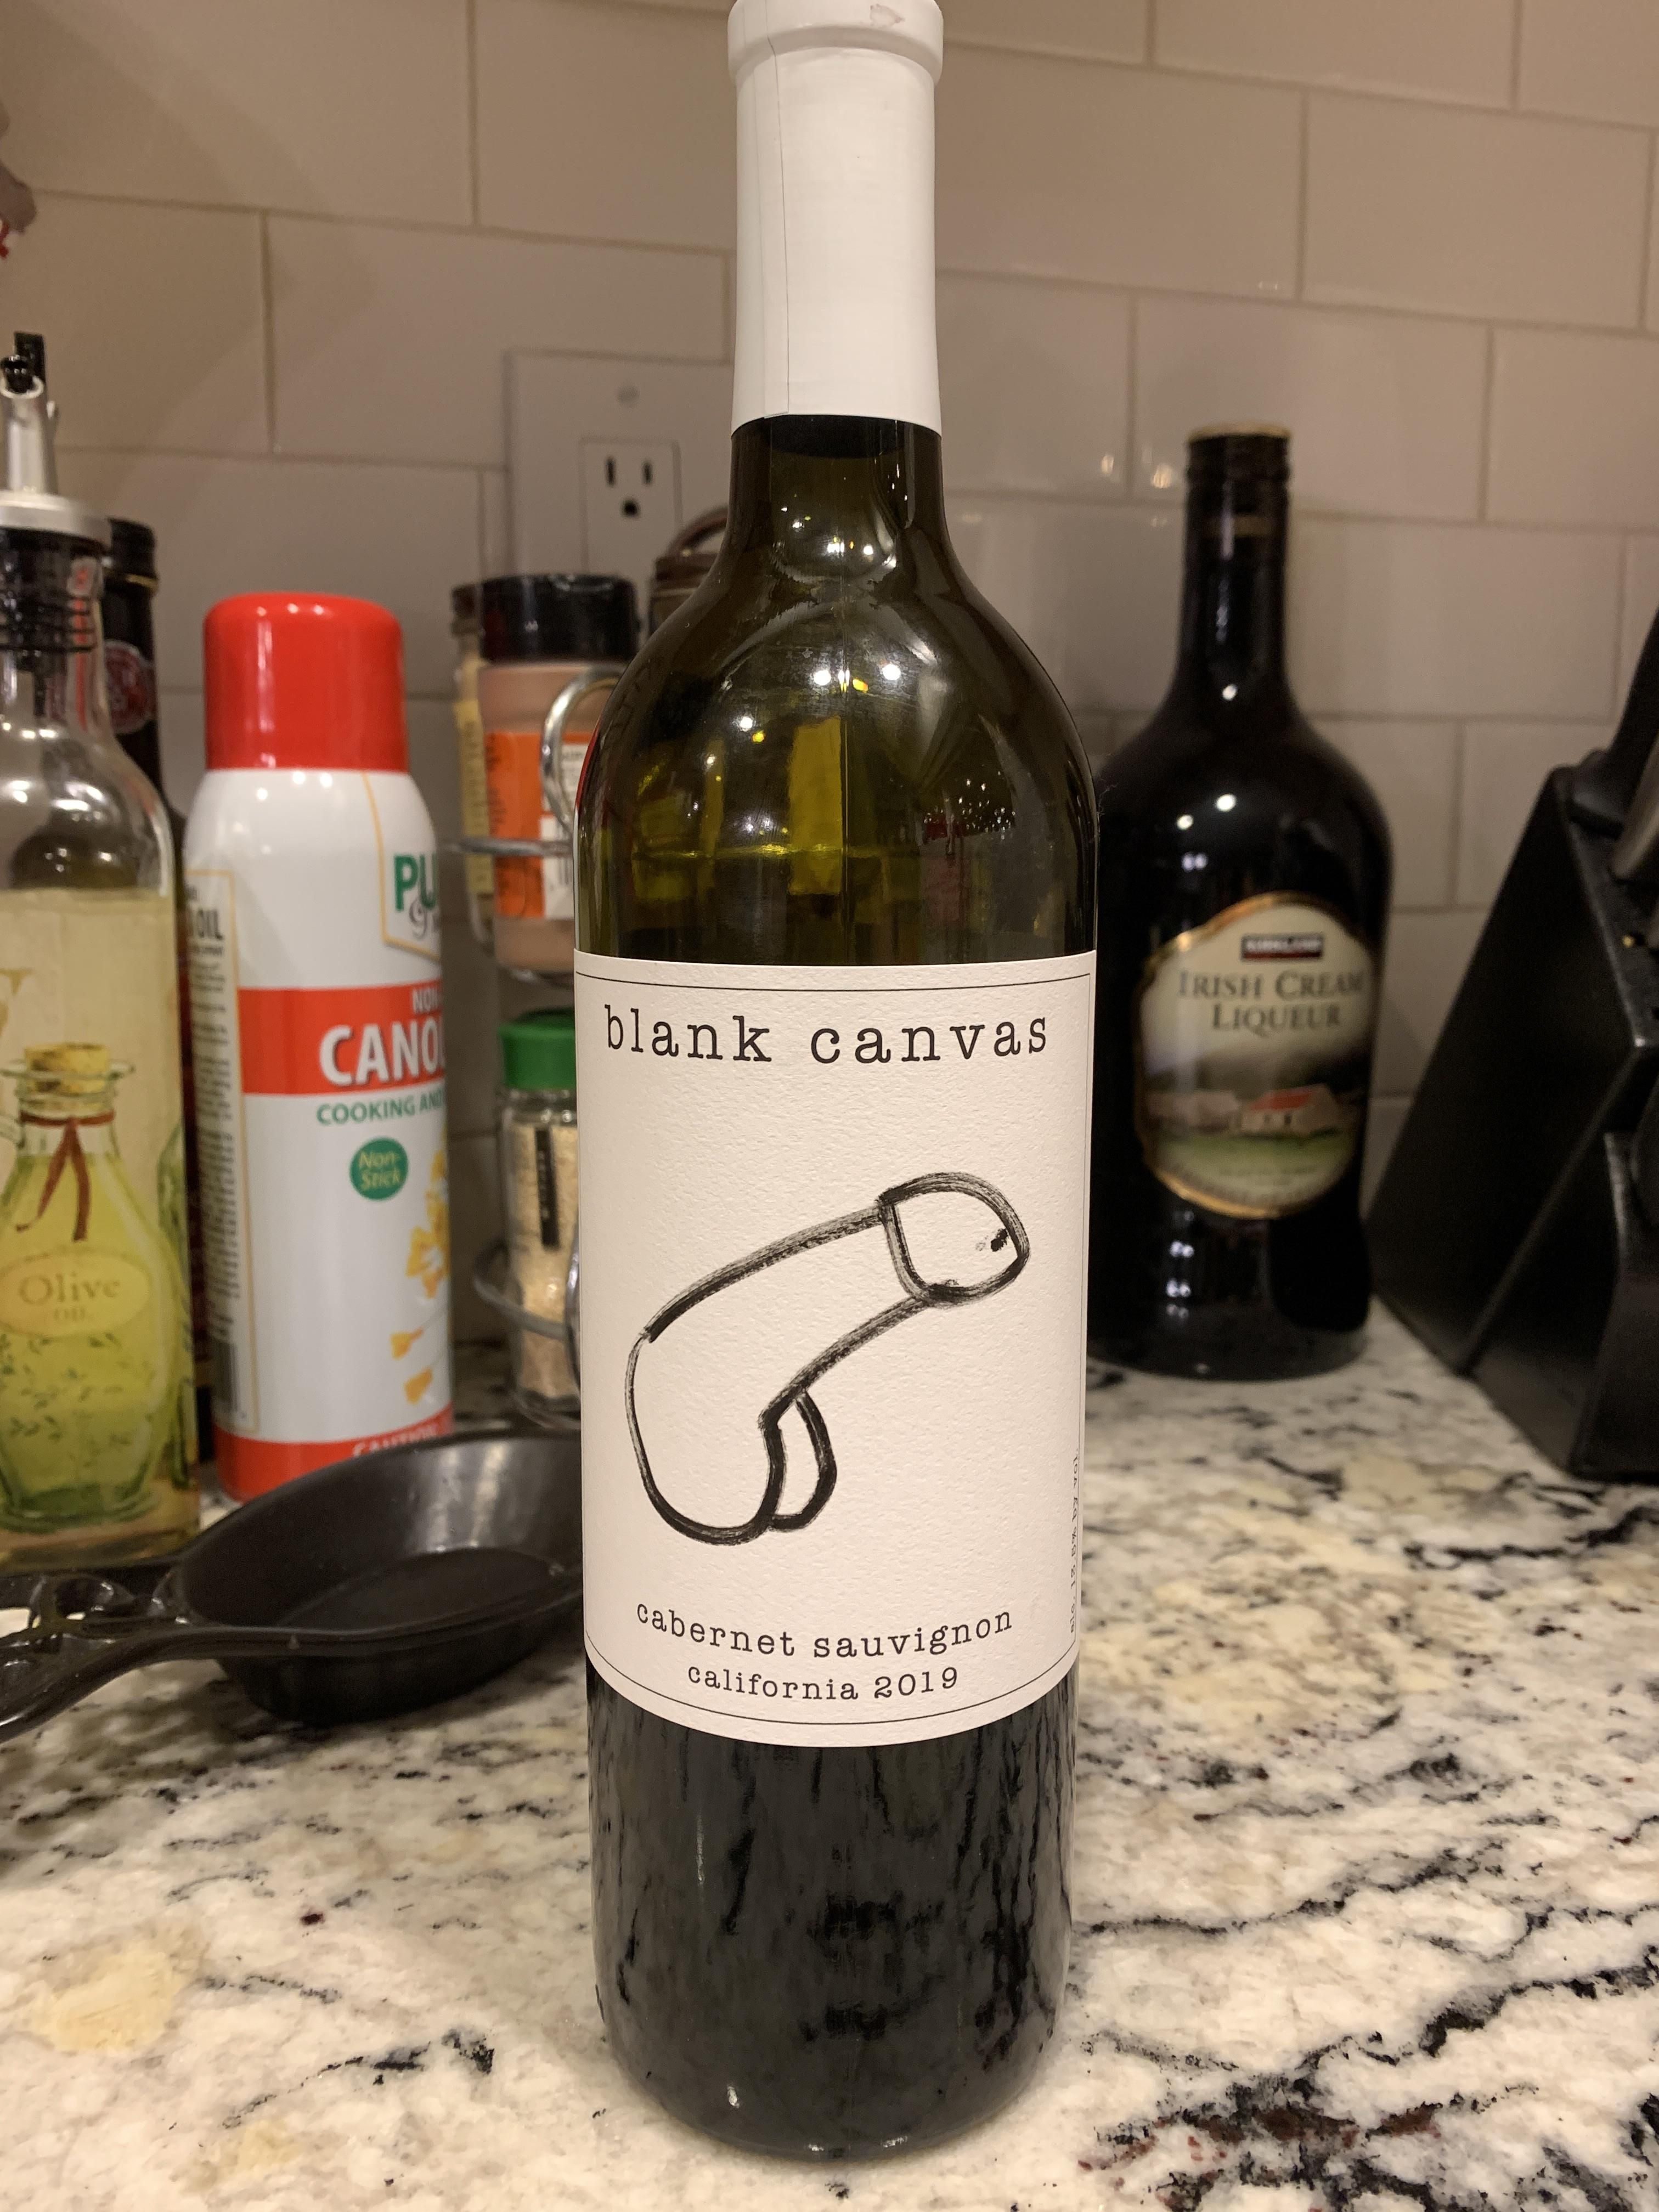 My wife left her wine bottle unattended, and it was just asking for it.